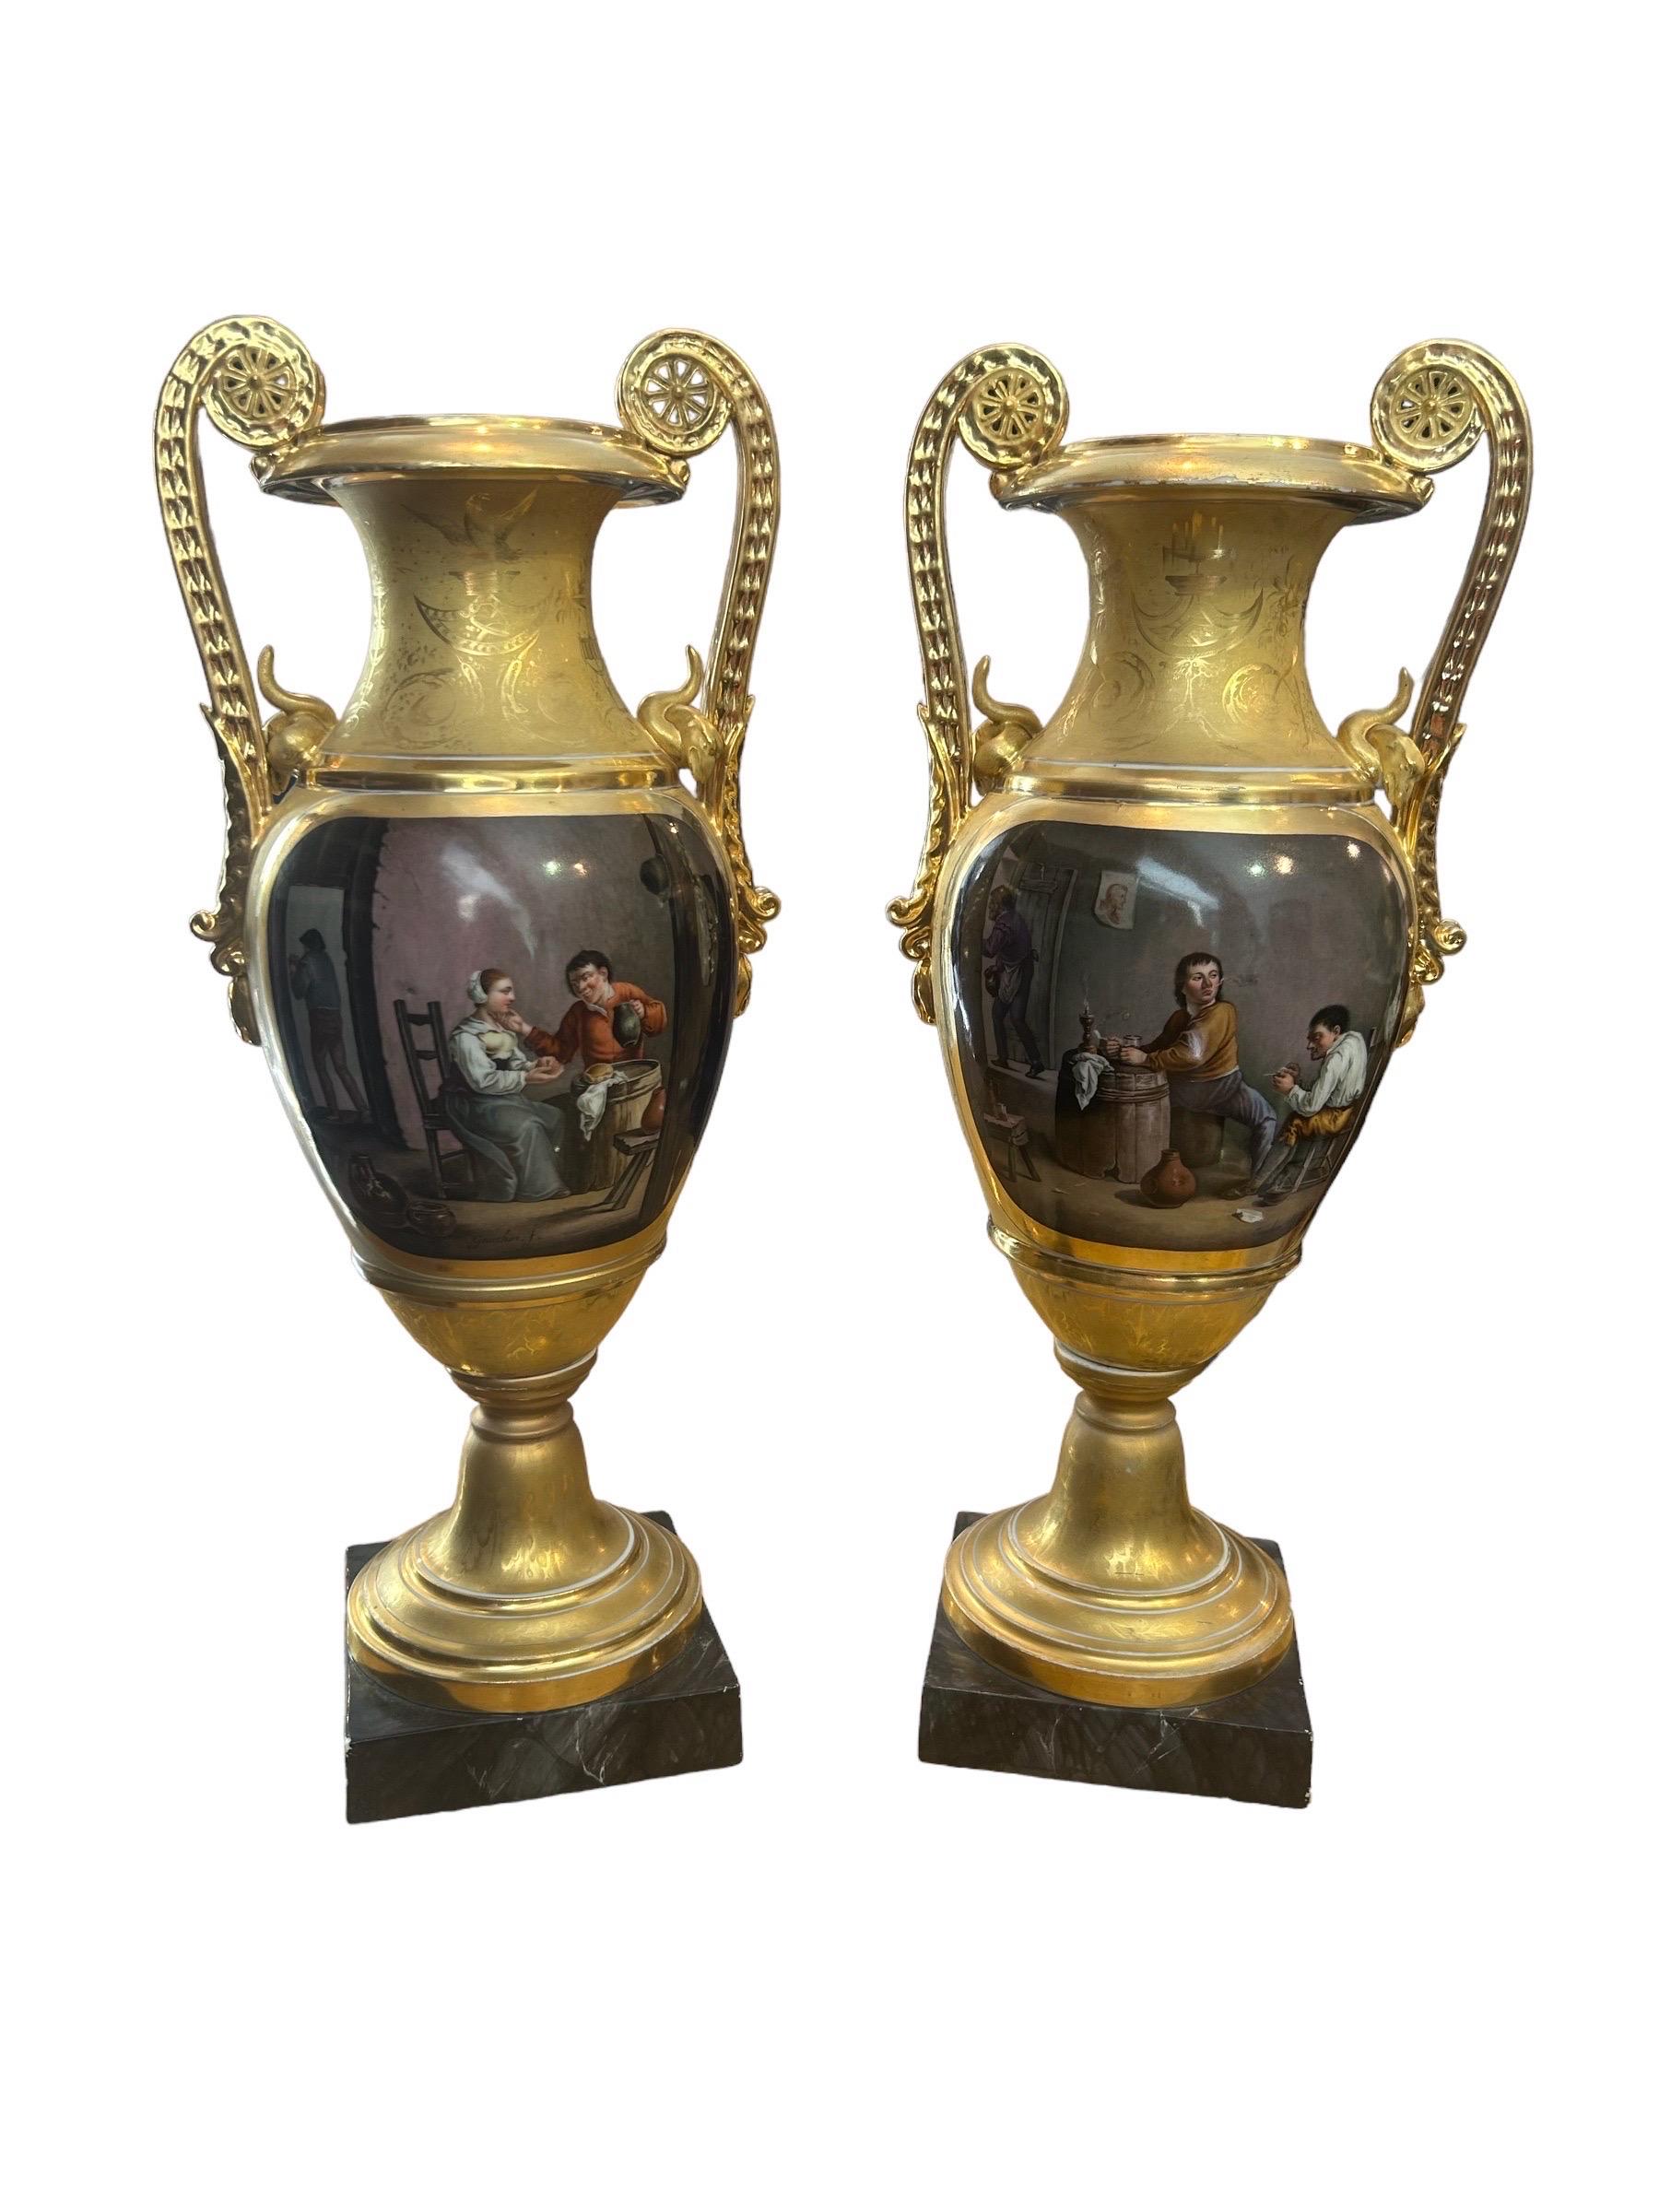 Pair of Empire period amphorae in gilded porcelain painted in polychrome neoclassical scenes, France. Signed, Gauchin, f. 